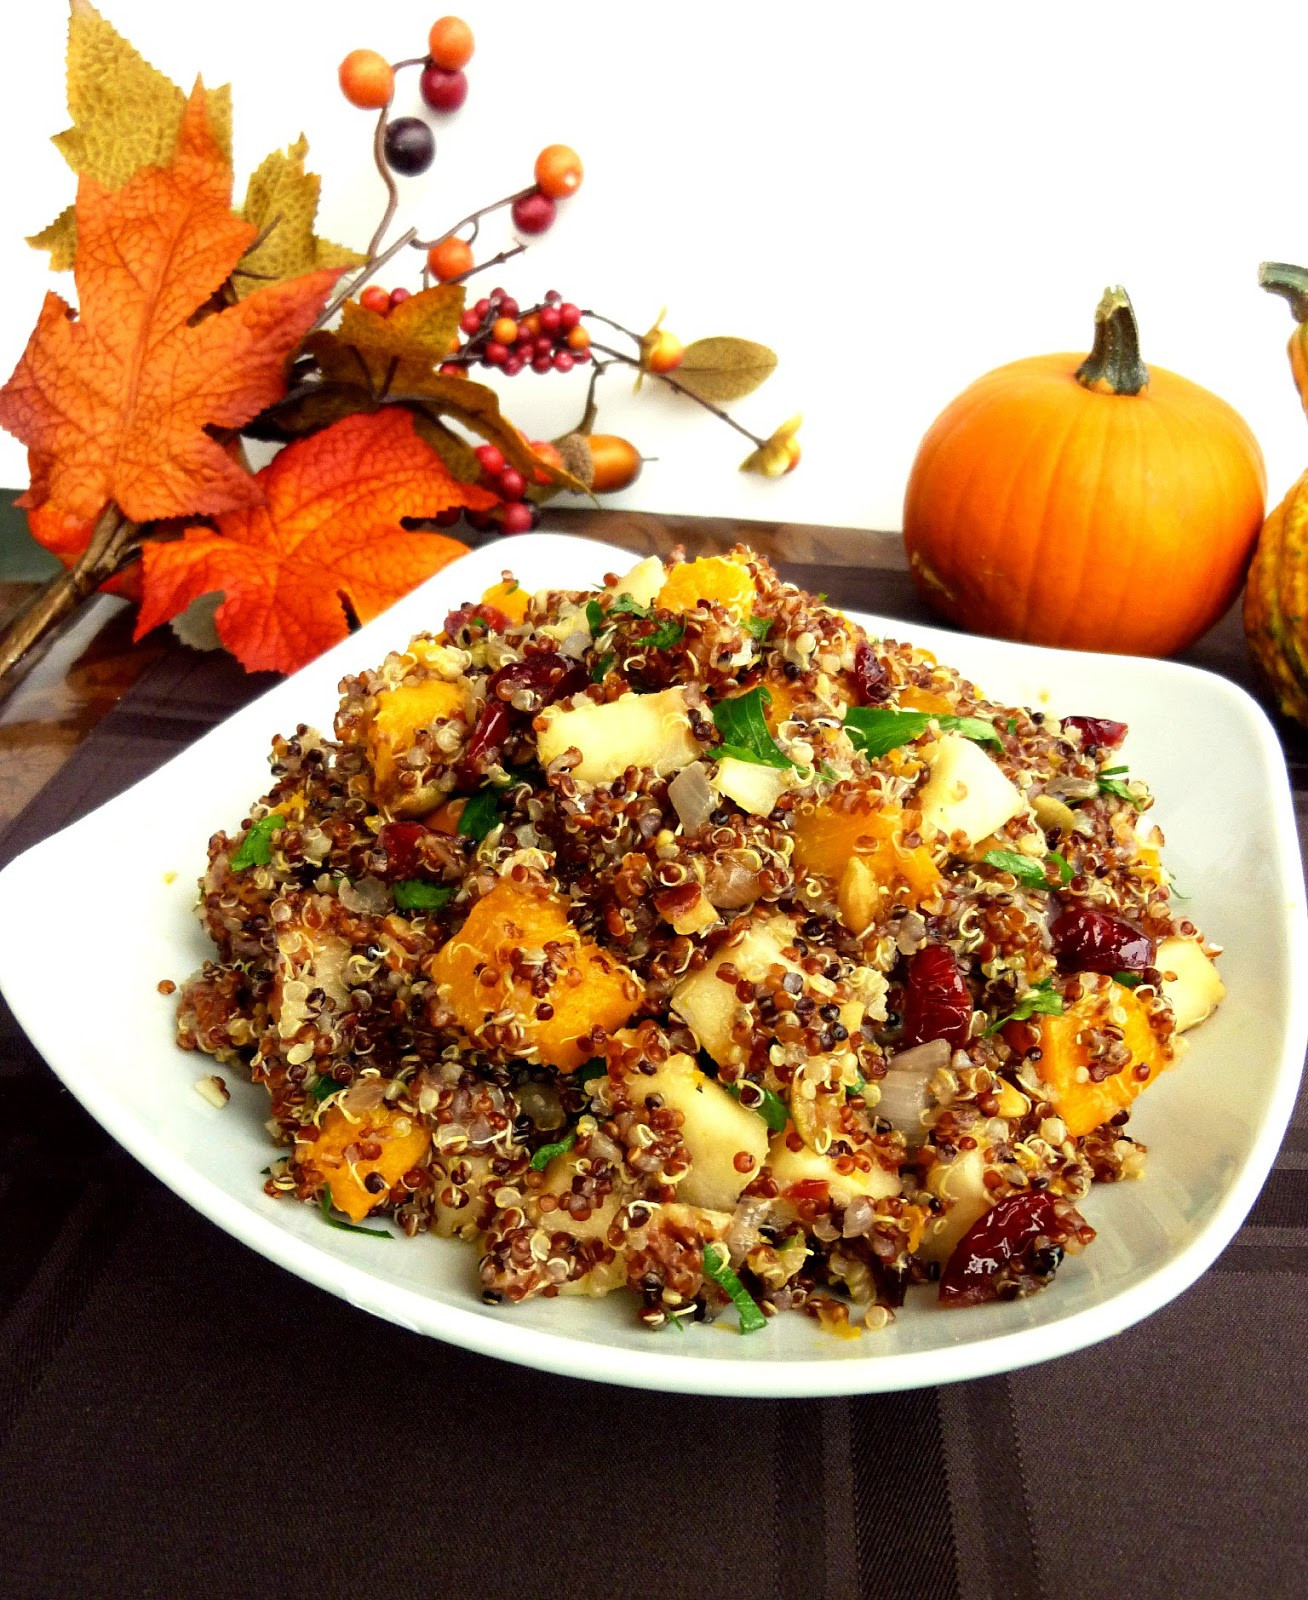 Vegetarian Dish For Thanksgiving
 Vanilla & Spice Recipes for a Ve arian Thanksgiving